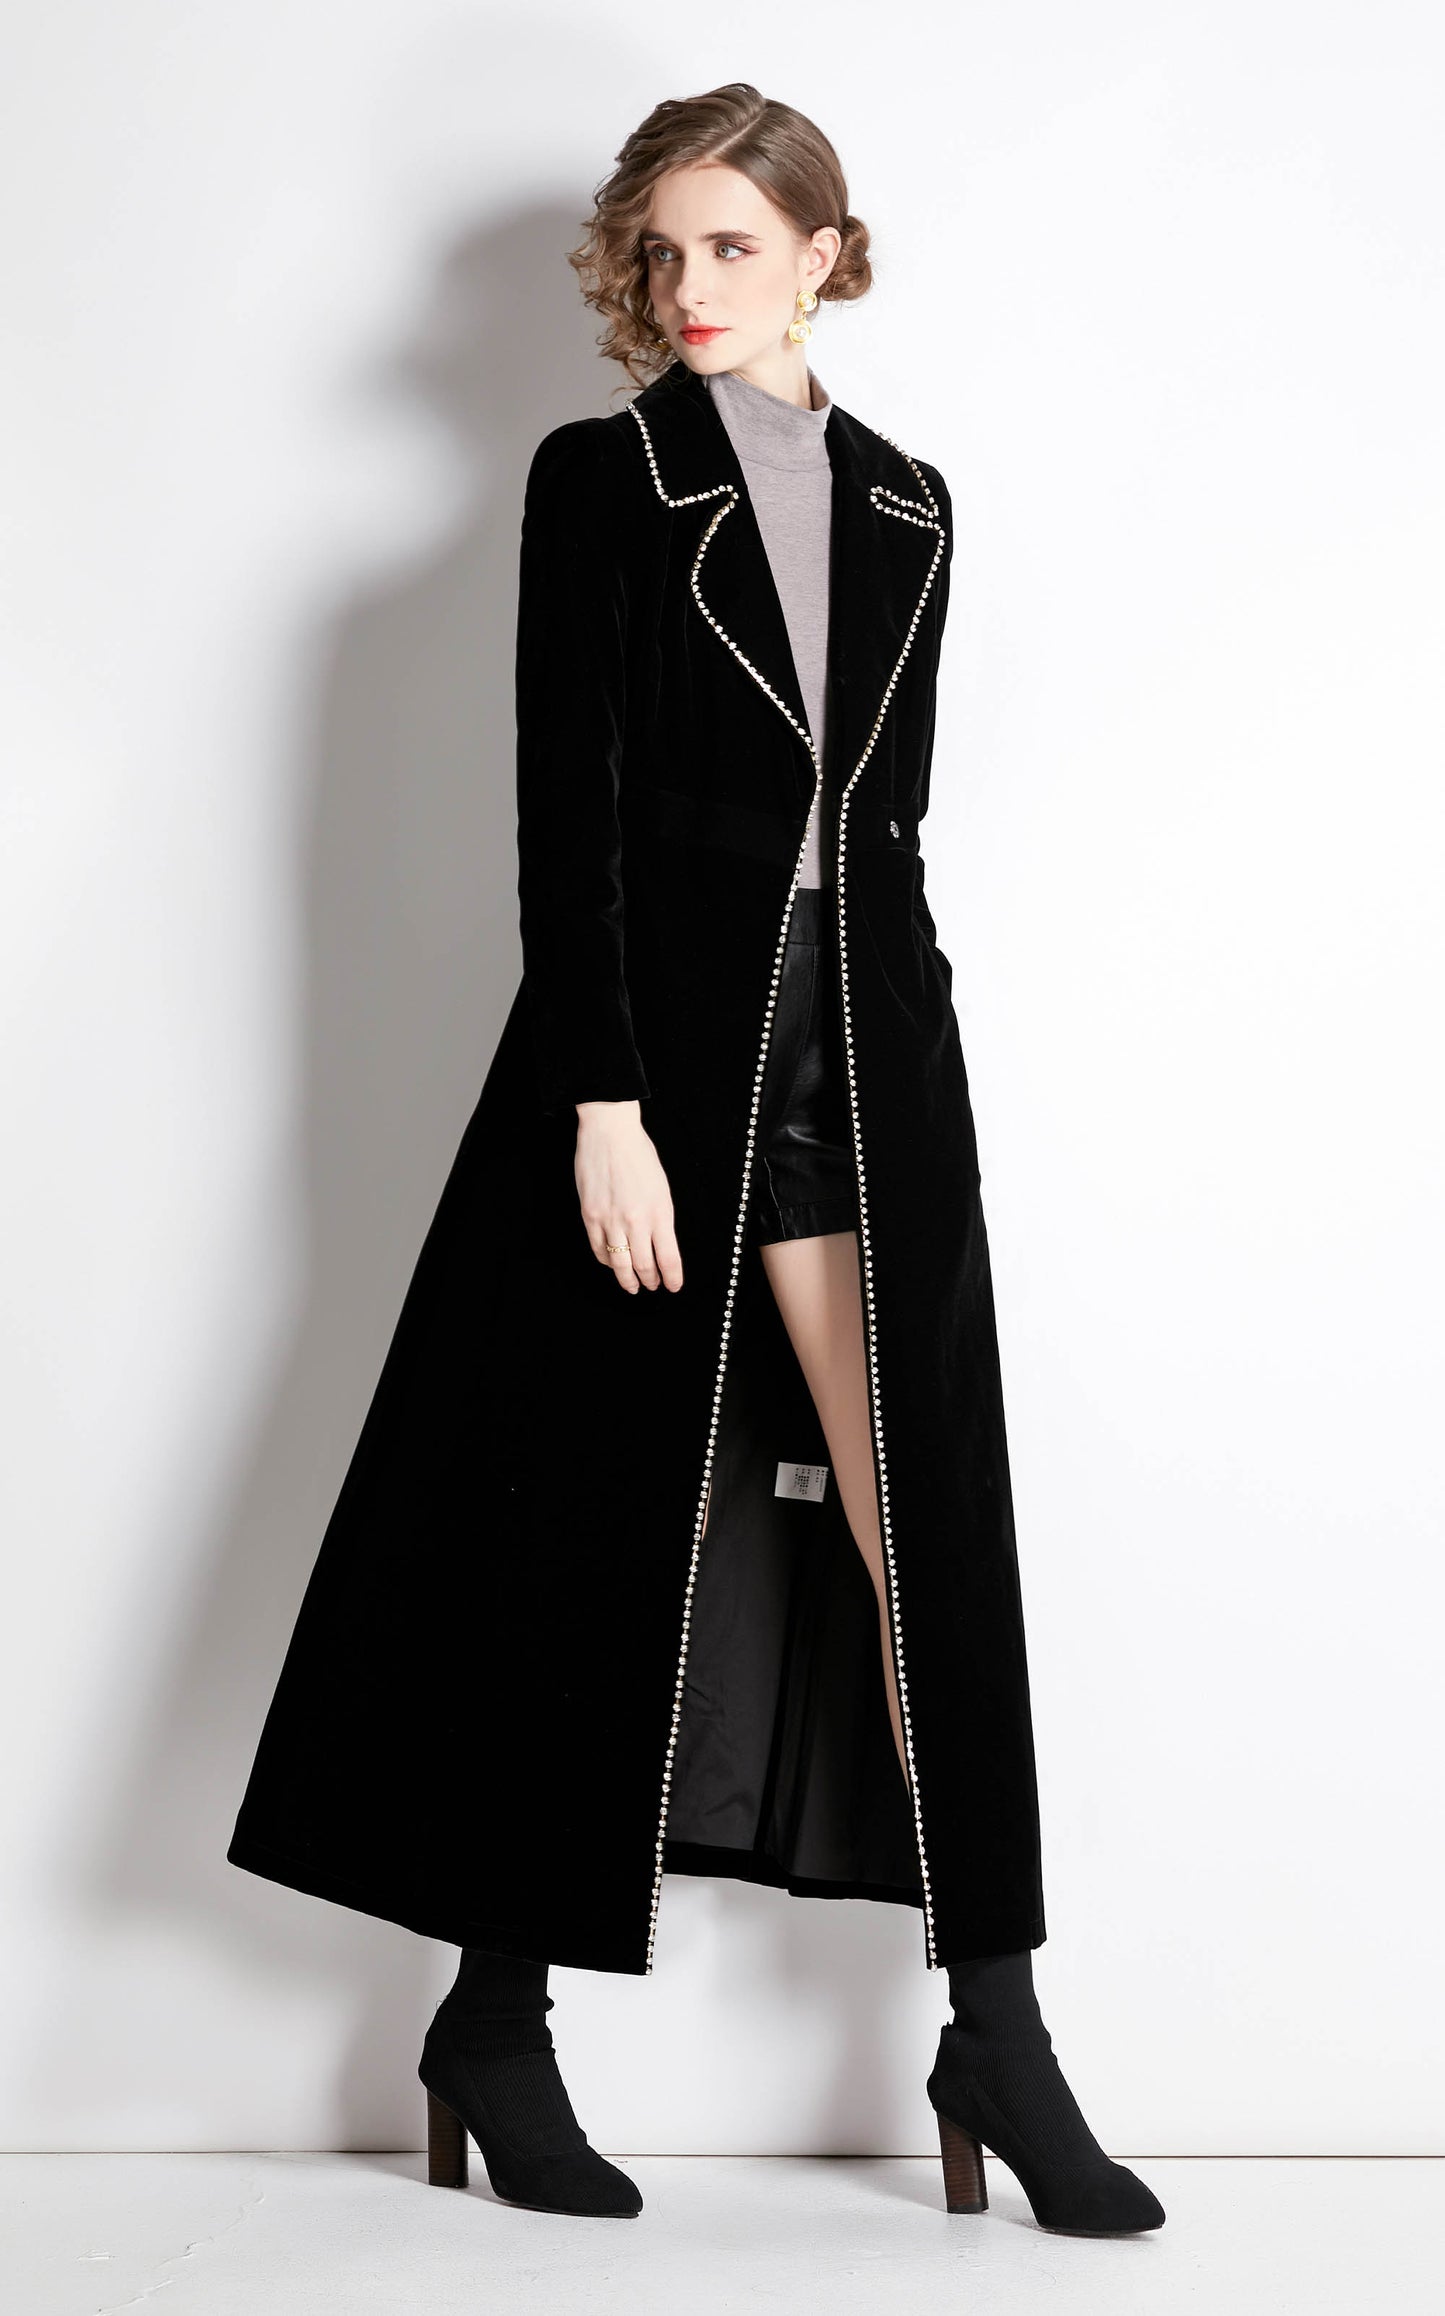 Velvet Notched Lapel Maxi-Length Trench Coat with Pocket